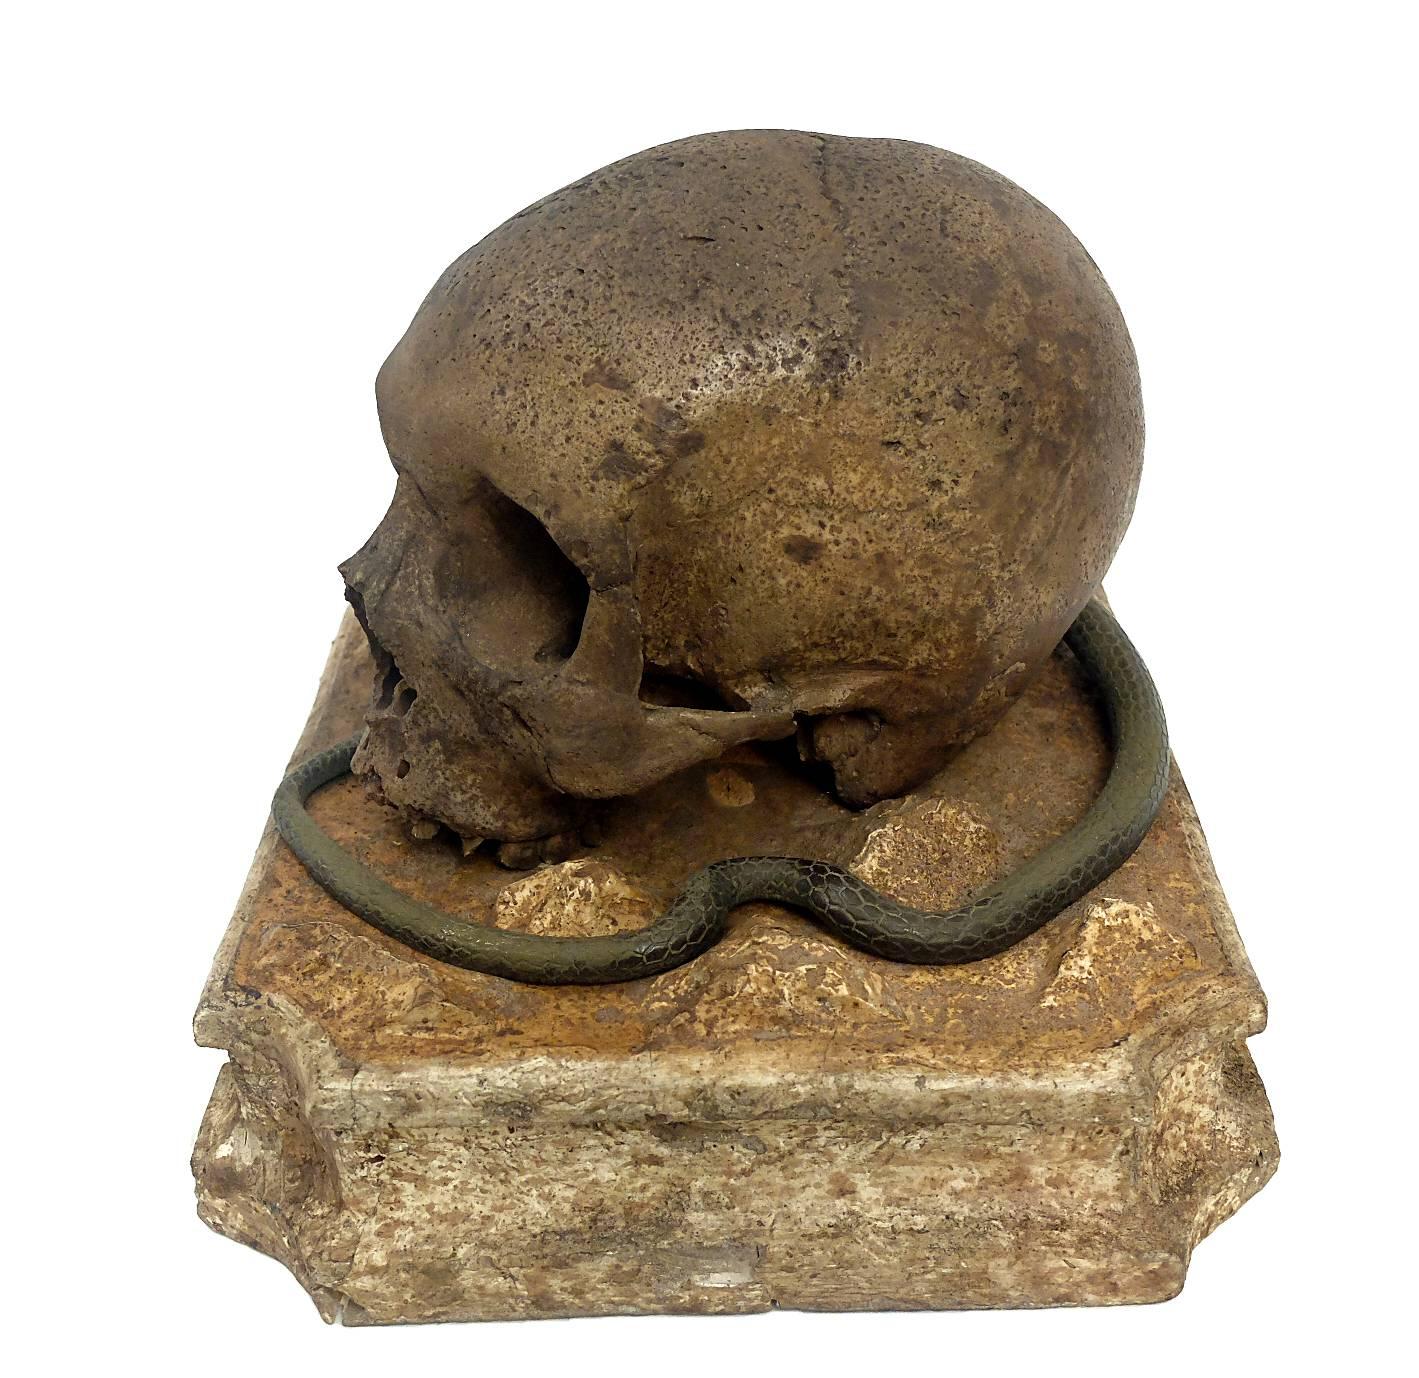 Late 19th Century Memento Mori, a Skull Sculpture Out of Chalk, with a Bronze Snake, Italy